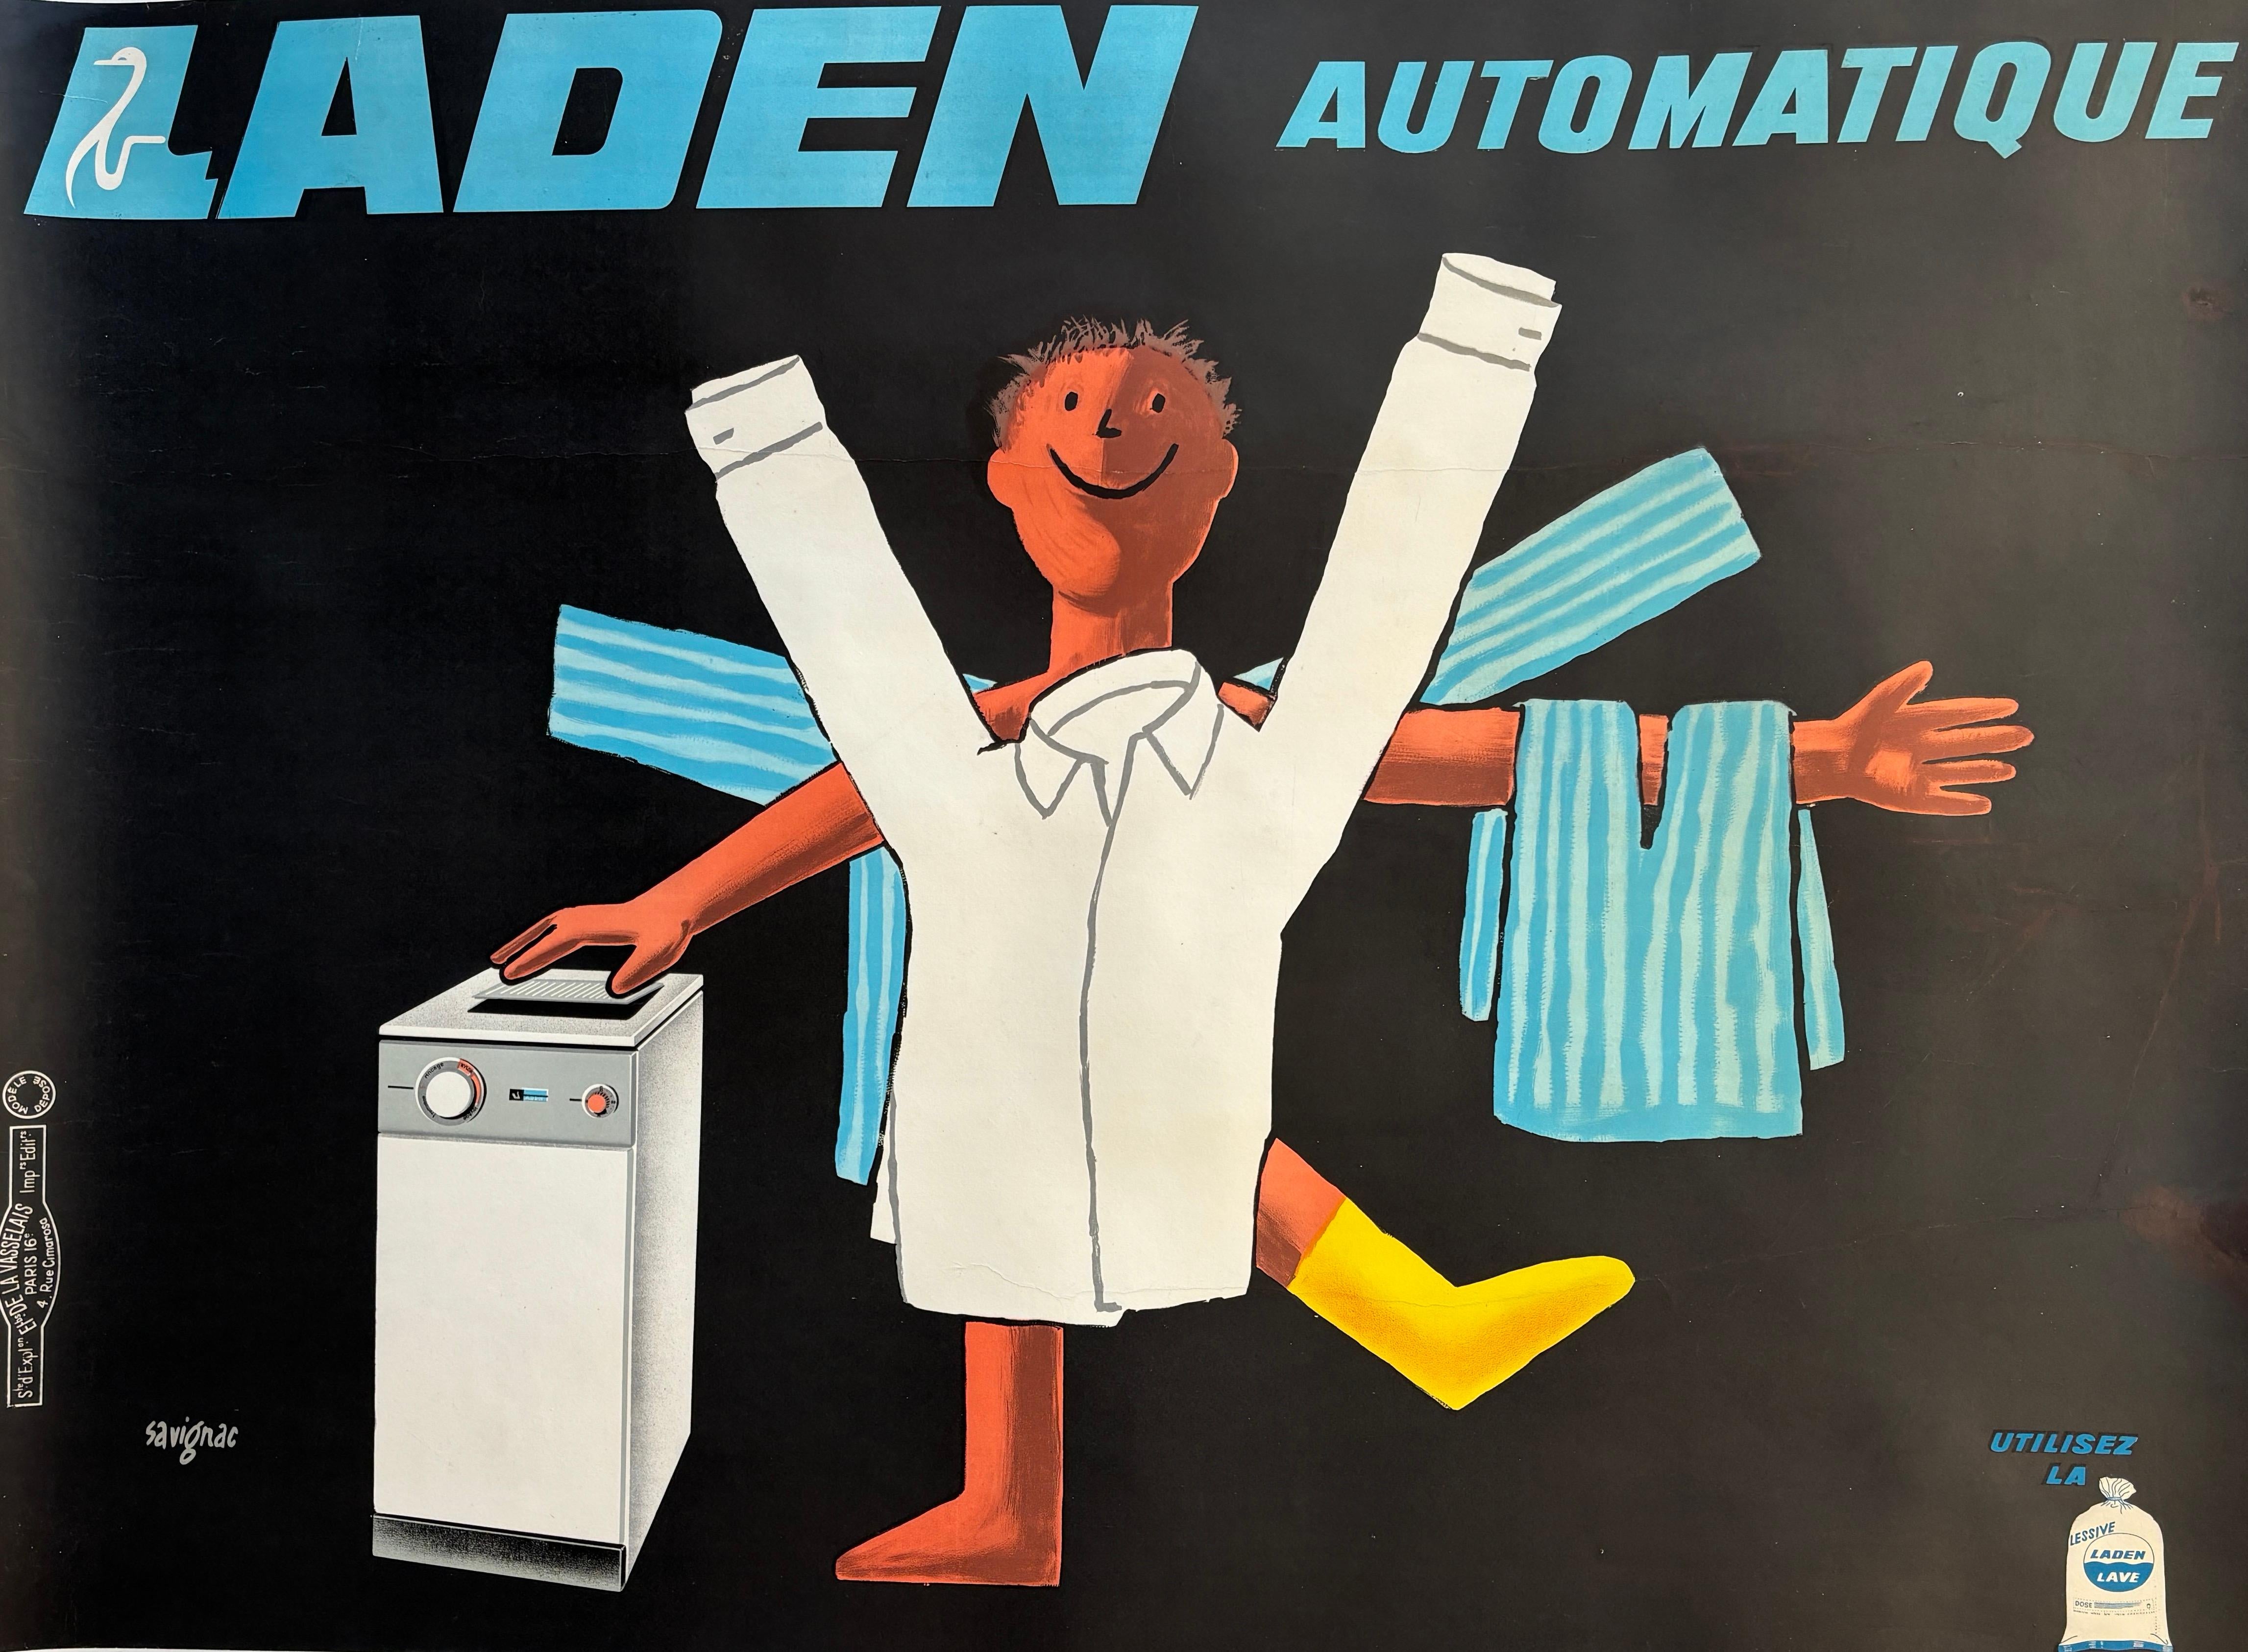 Original Vintage Poster for Savignac Laden Automatique. An advertisement designed in 1966 by Raymond Savignac.

Raymond Savignac was one of France's most iconic and influential poster artists. This poster is advertising the washing machine brand,